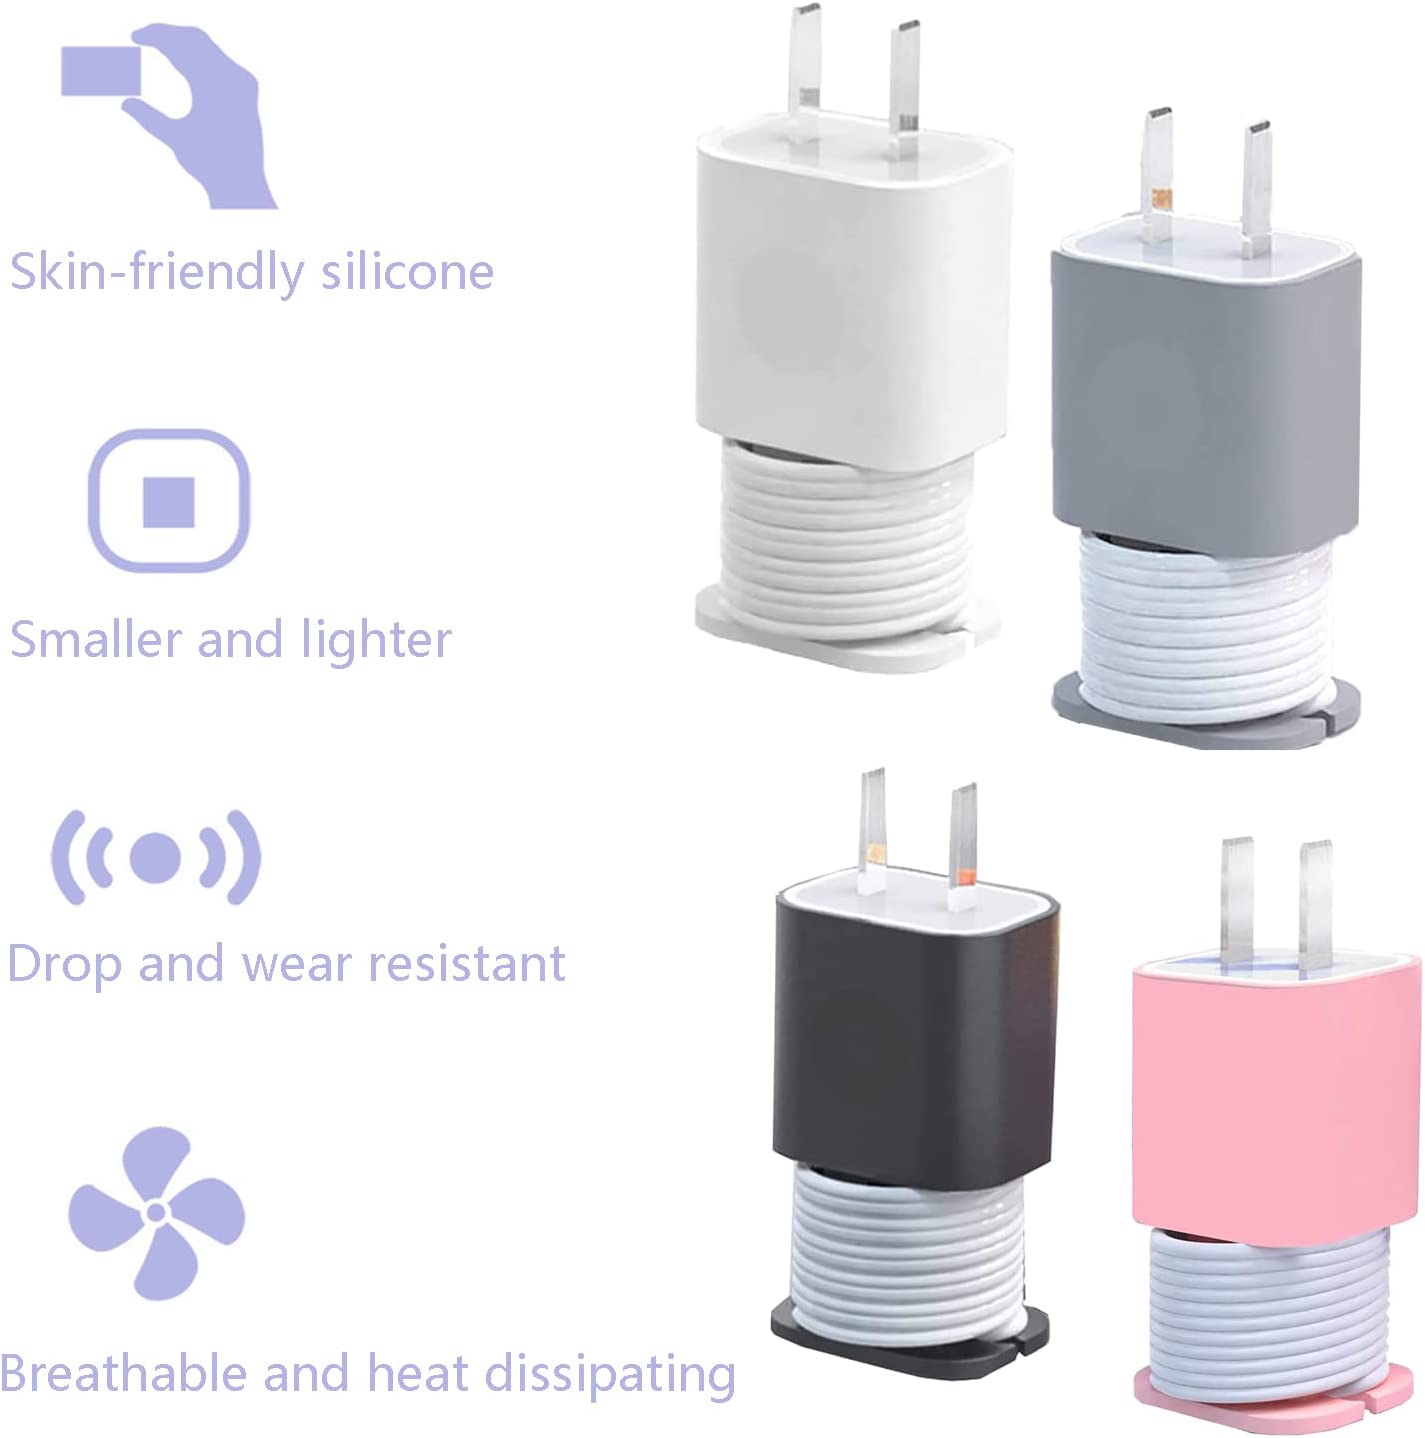 (🎄Christmas Hot Sale - 48% OFF) 2 In 1 Silicone Charger Protector, BUY 5 GET 3 FREE & FREE SHIPPING